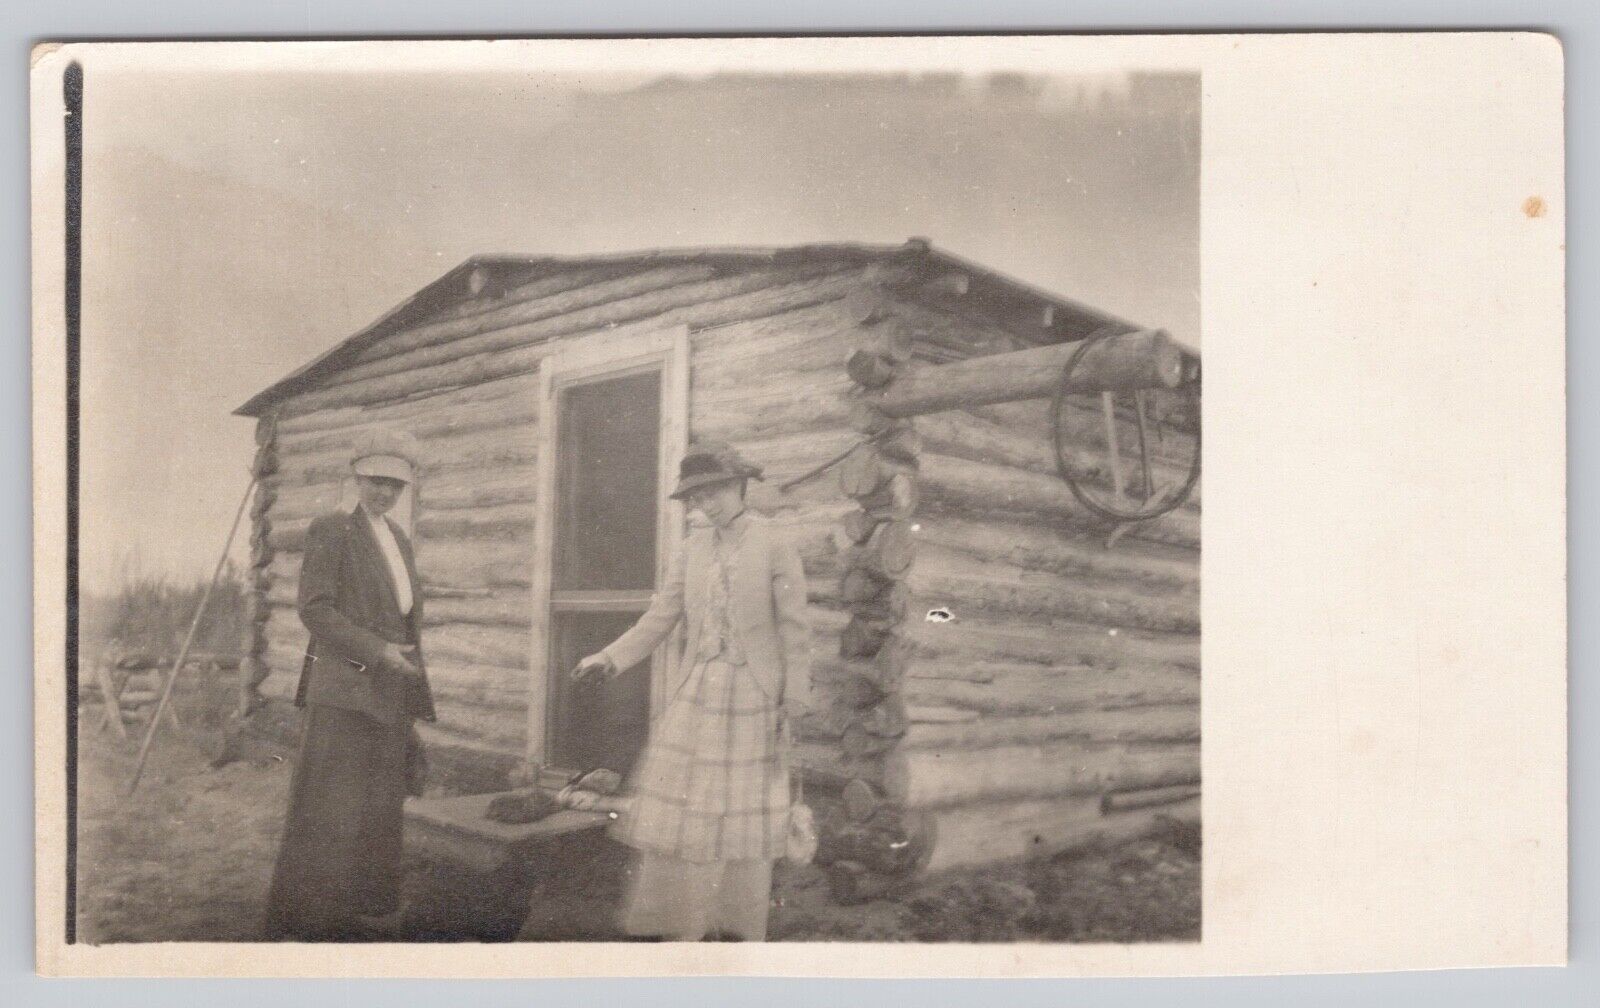 c1904 Very Old RPPC -CYKO Stamp Box - Two Women Posing in Front of Log Cabin -B2